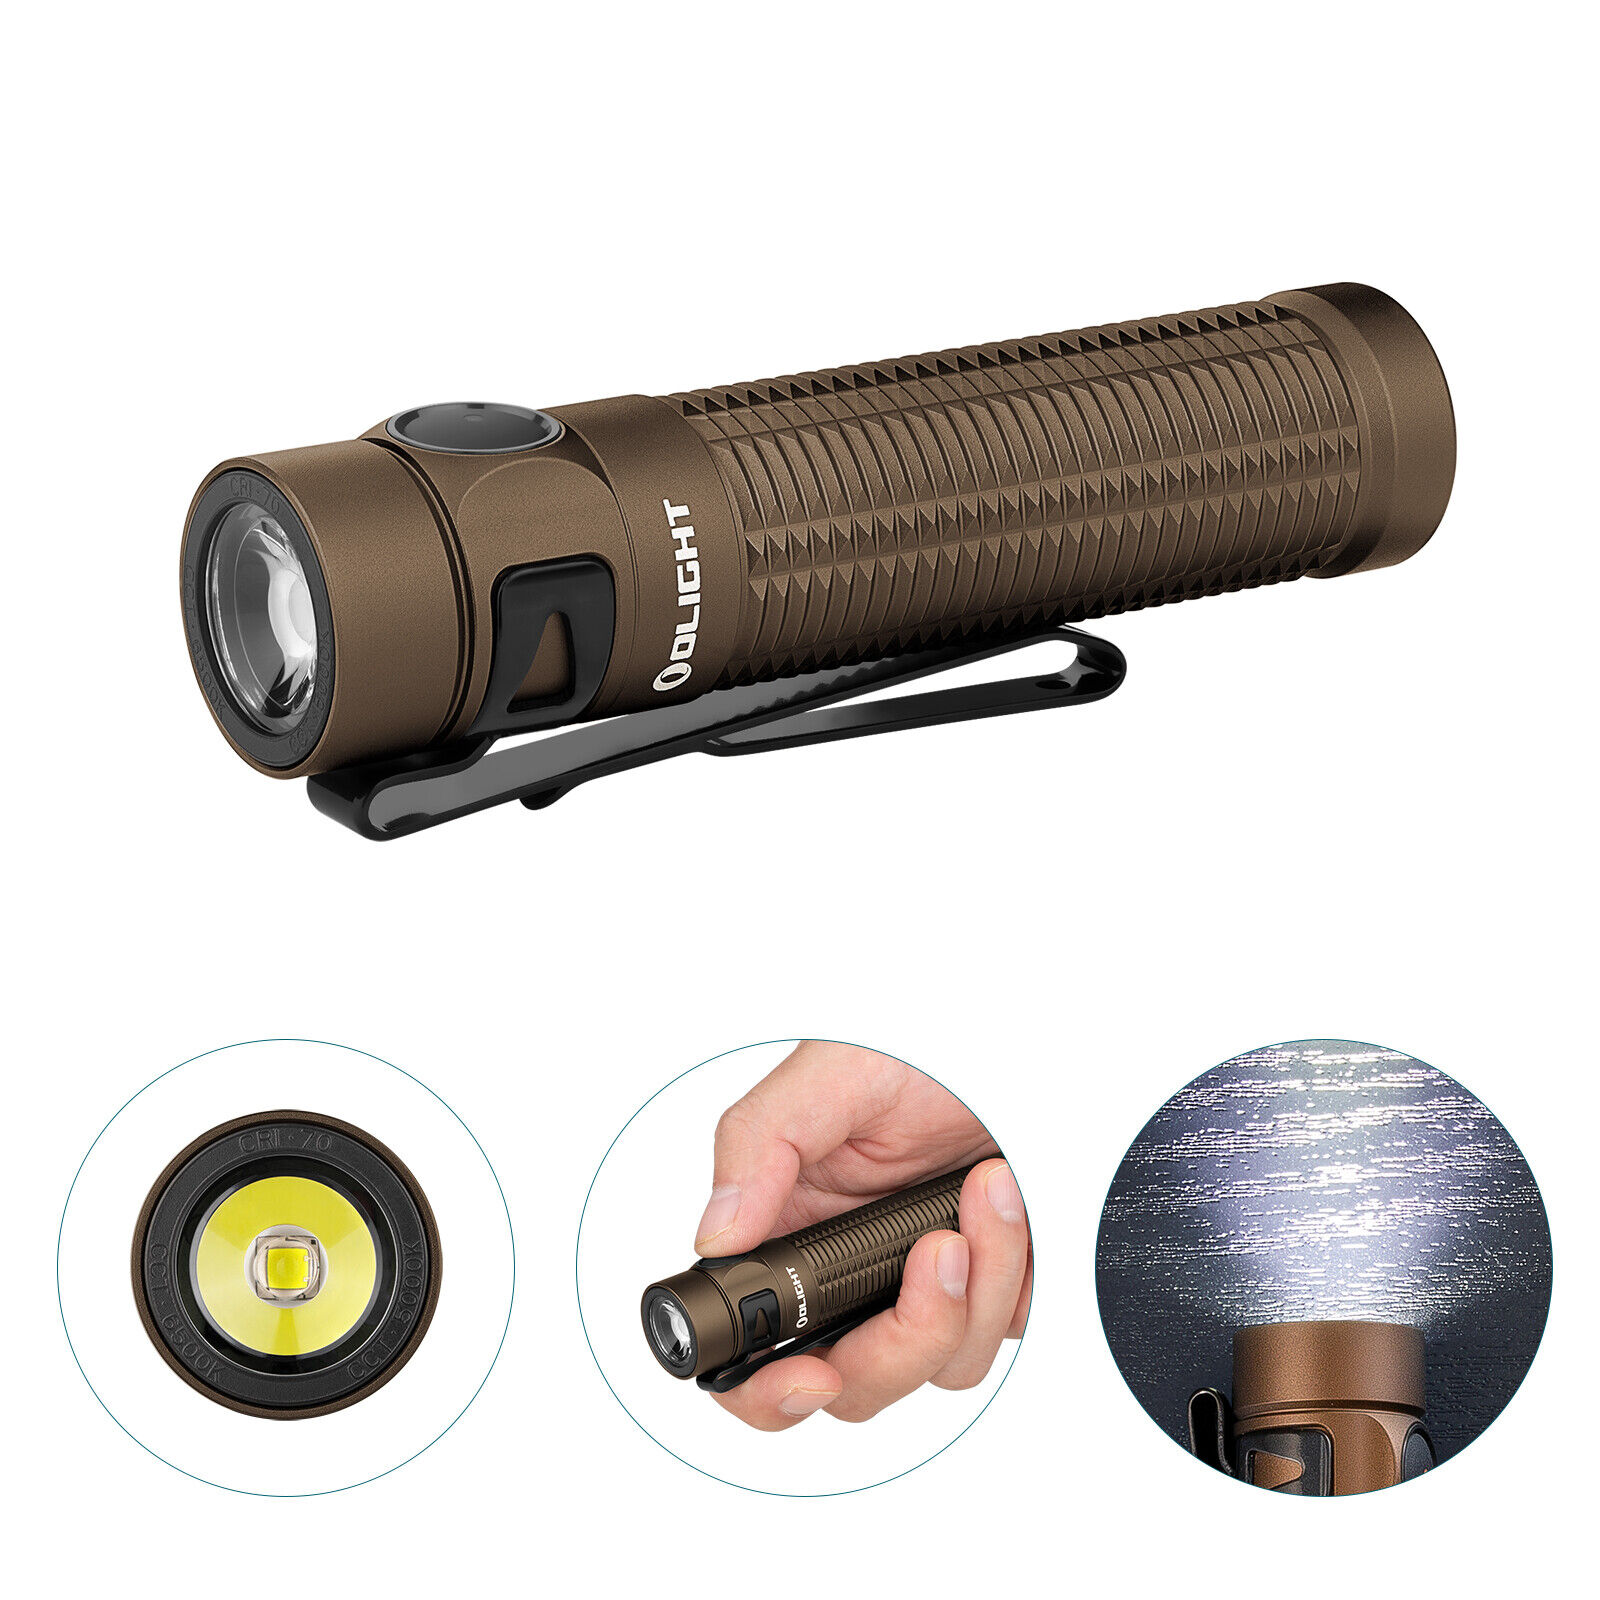 Olight Baton 3 Pro 1500 lumens Rechargeable Flashlight CW L-shape Stand included